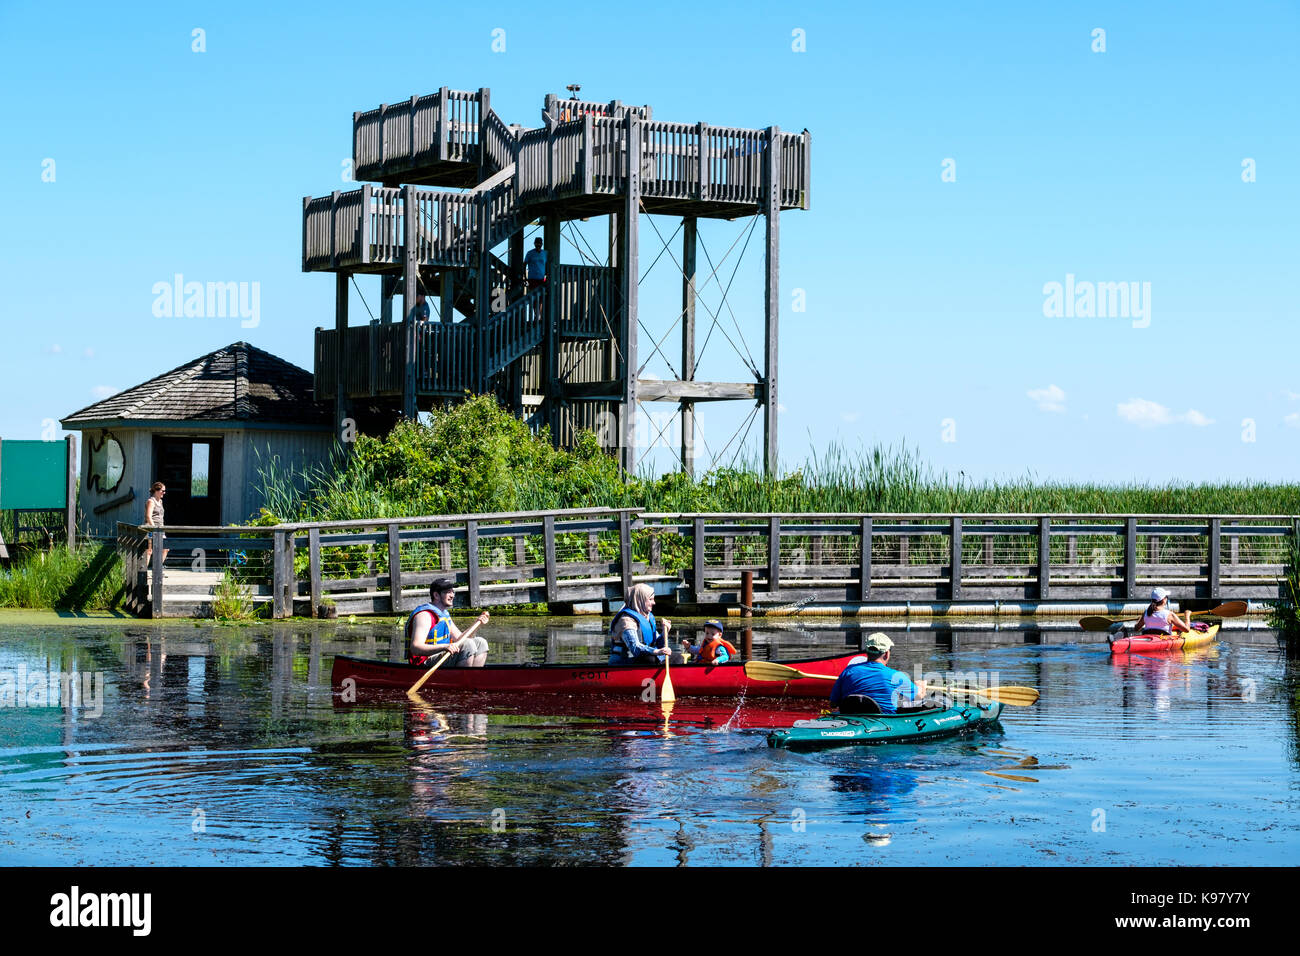 Visitors on a Summer day at Point Pelee National Park canoeing, kayaking and enjoying the view from the top of the observation tower, Ontario, Canada. Stock Photo